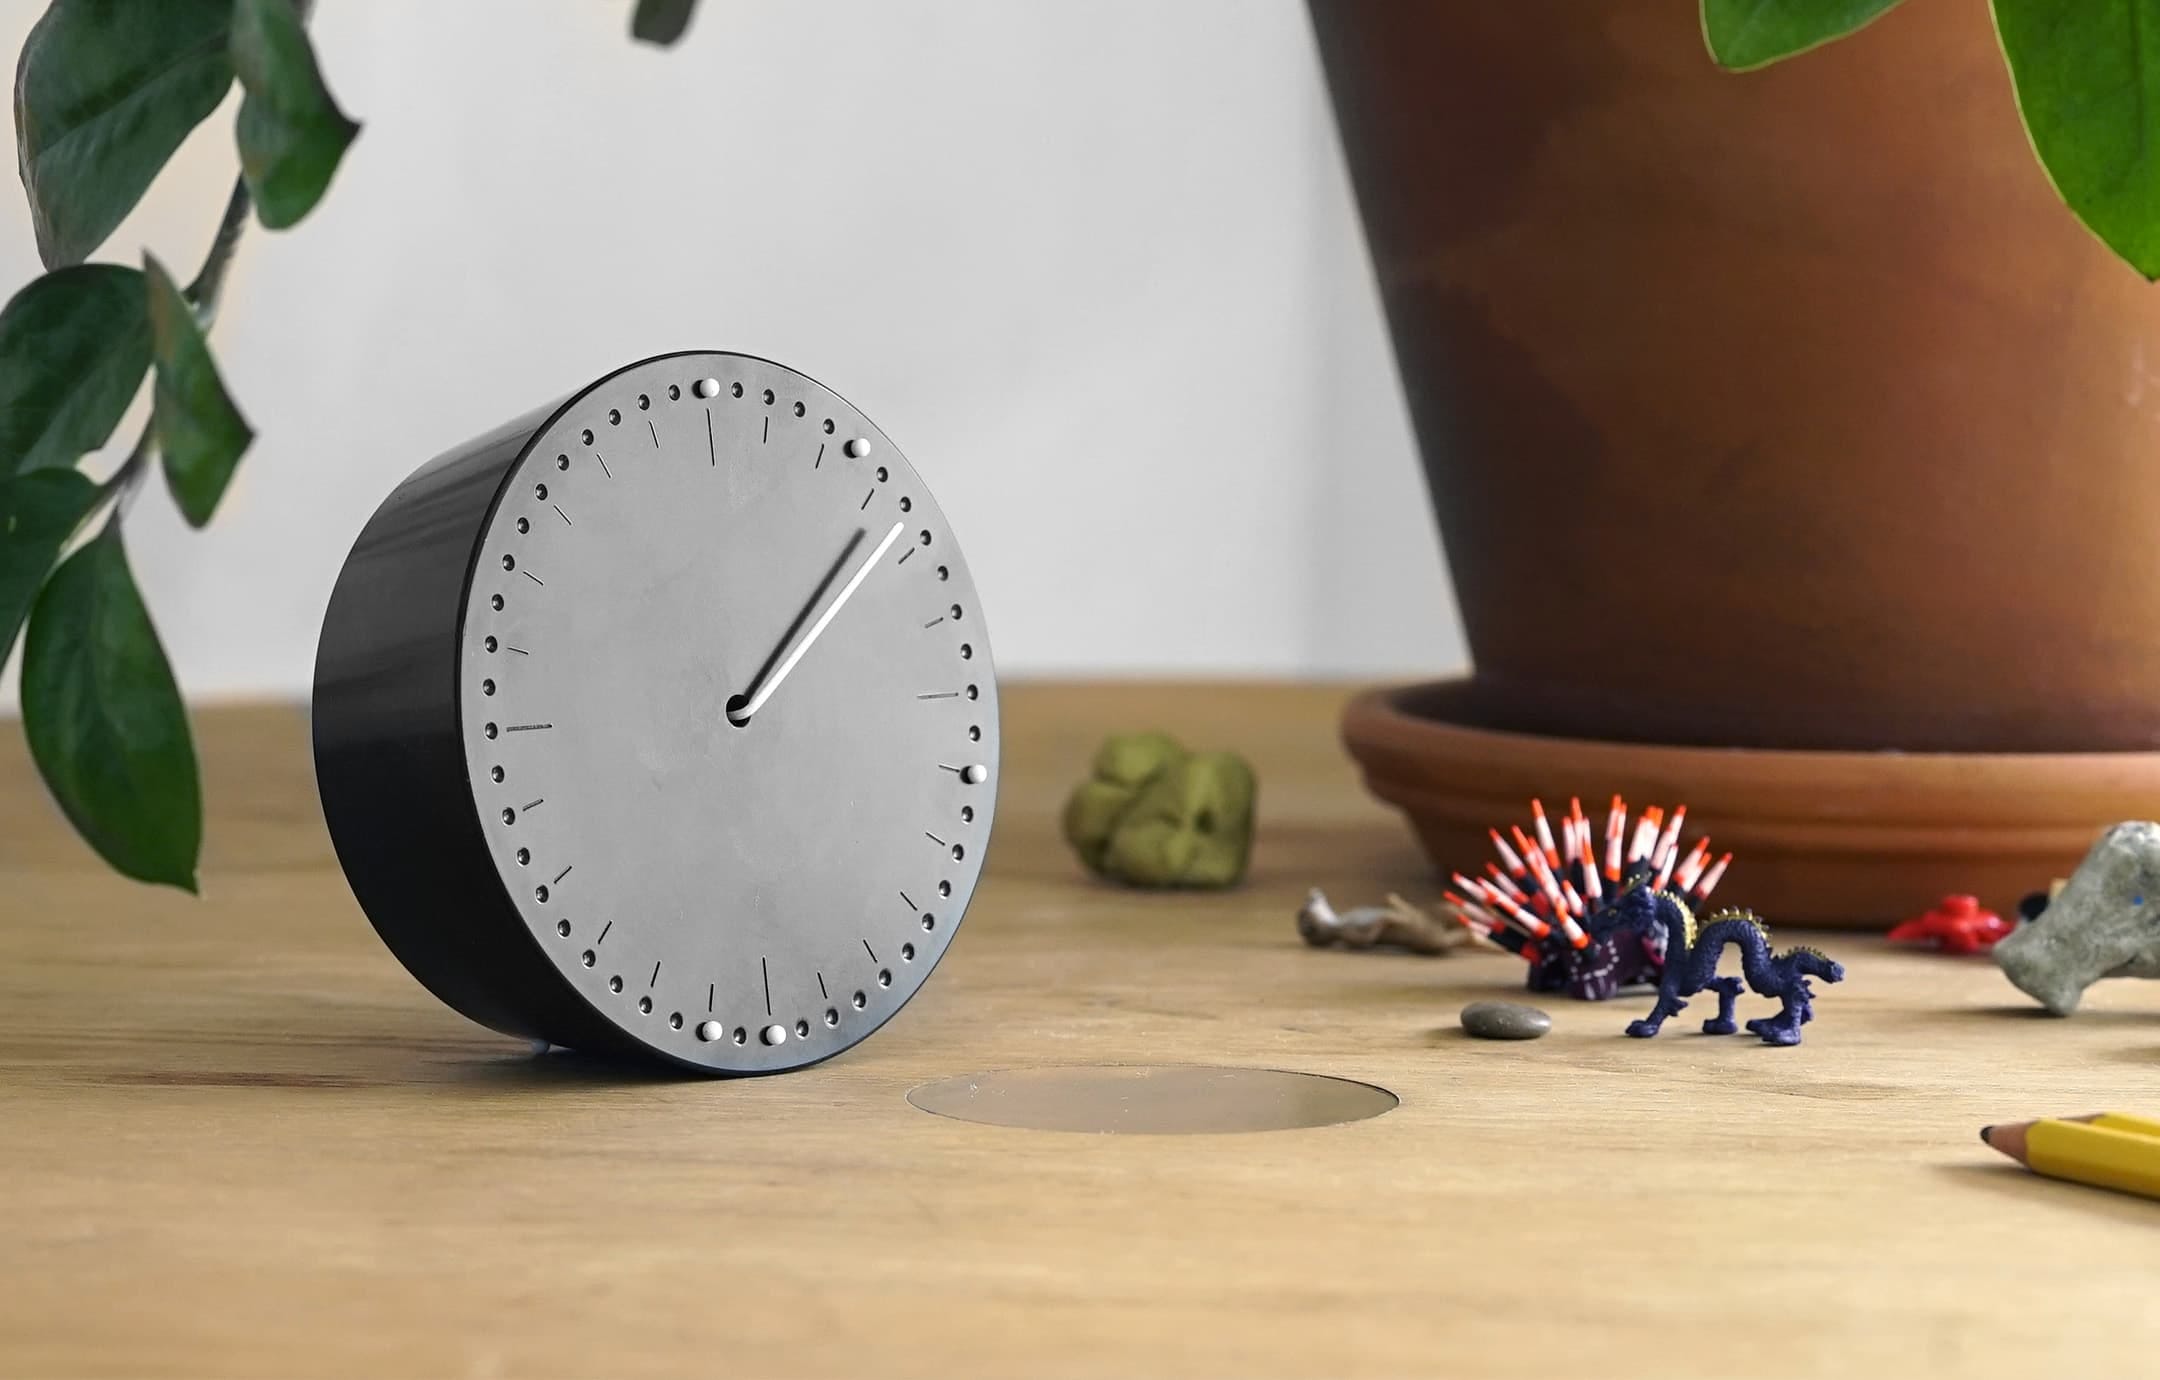 Photograph of a Superlocal clock, by CW&T, on a desk with kids’ toys and a potted plant in the background